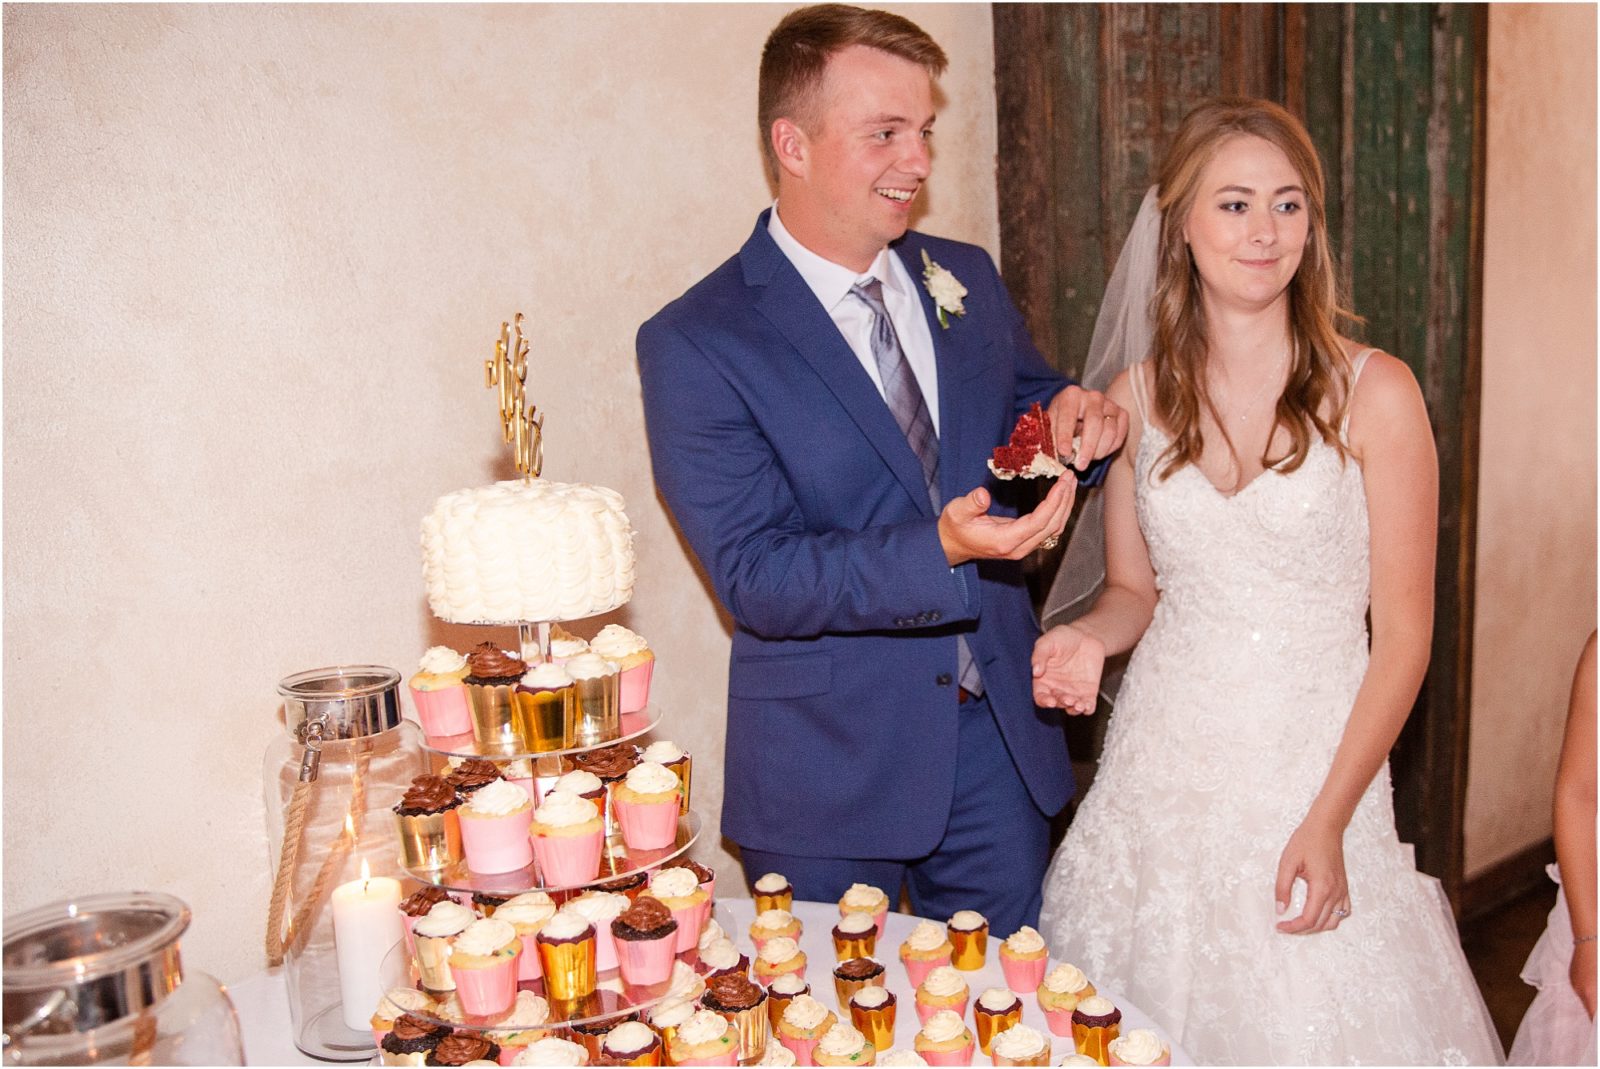 Groom and bride eat cupcakes